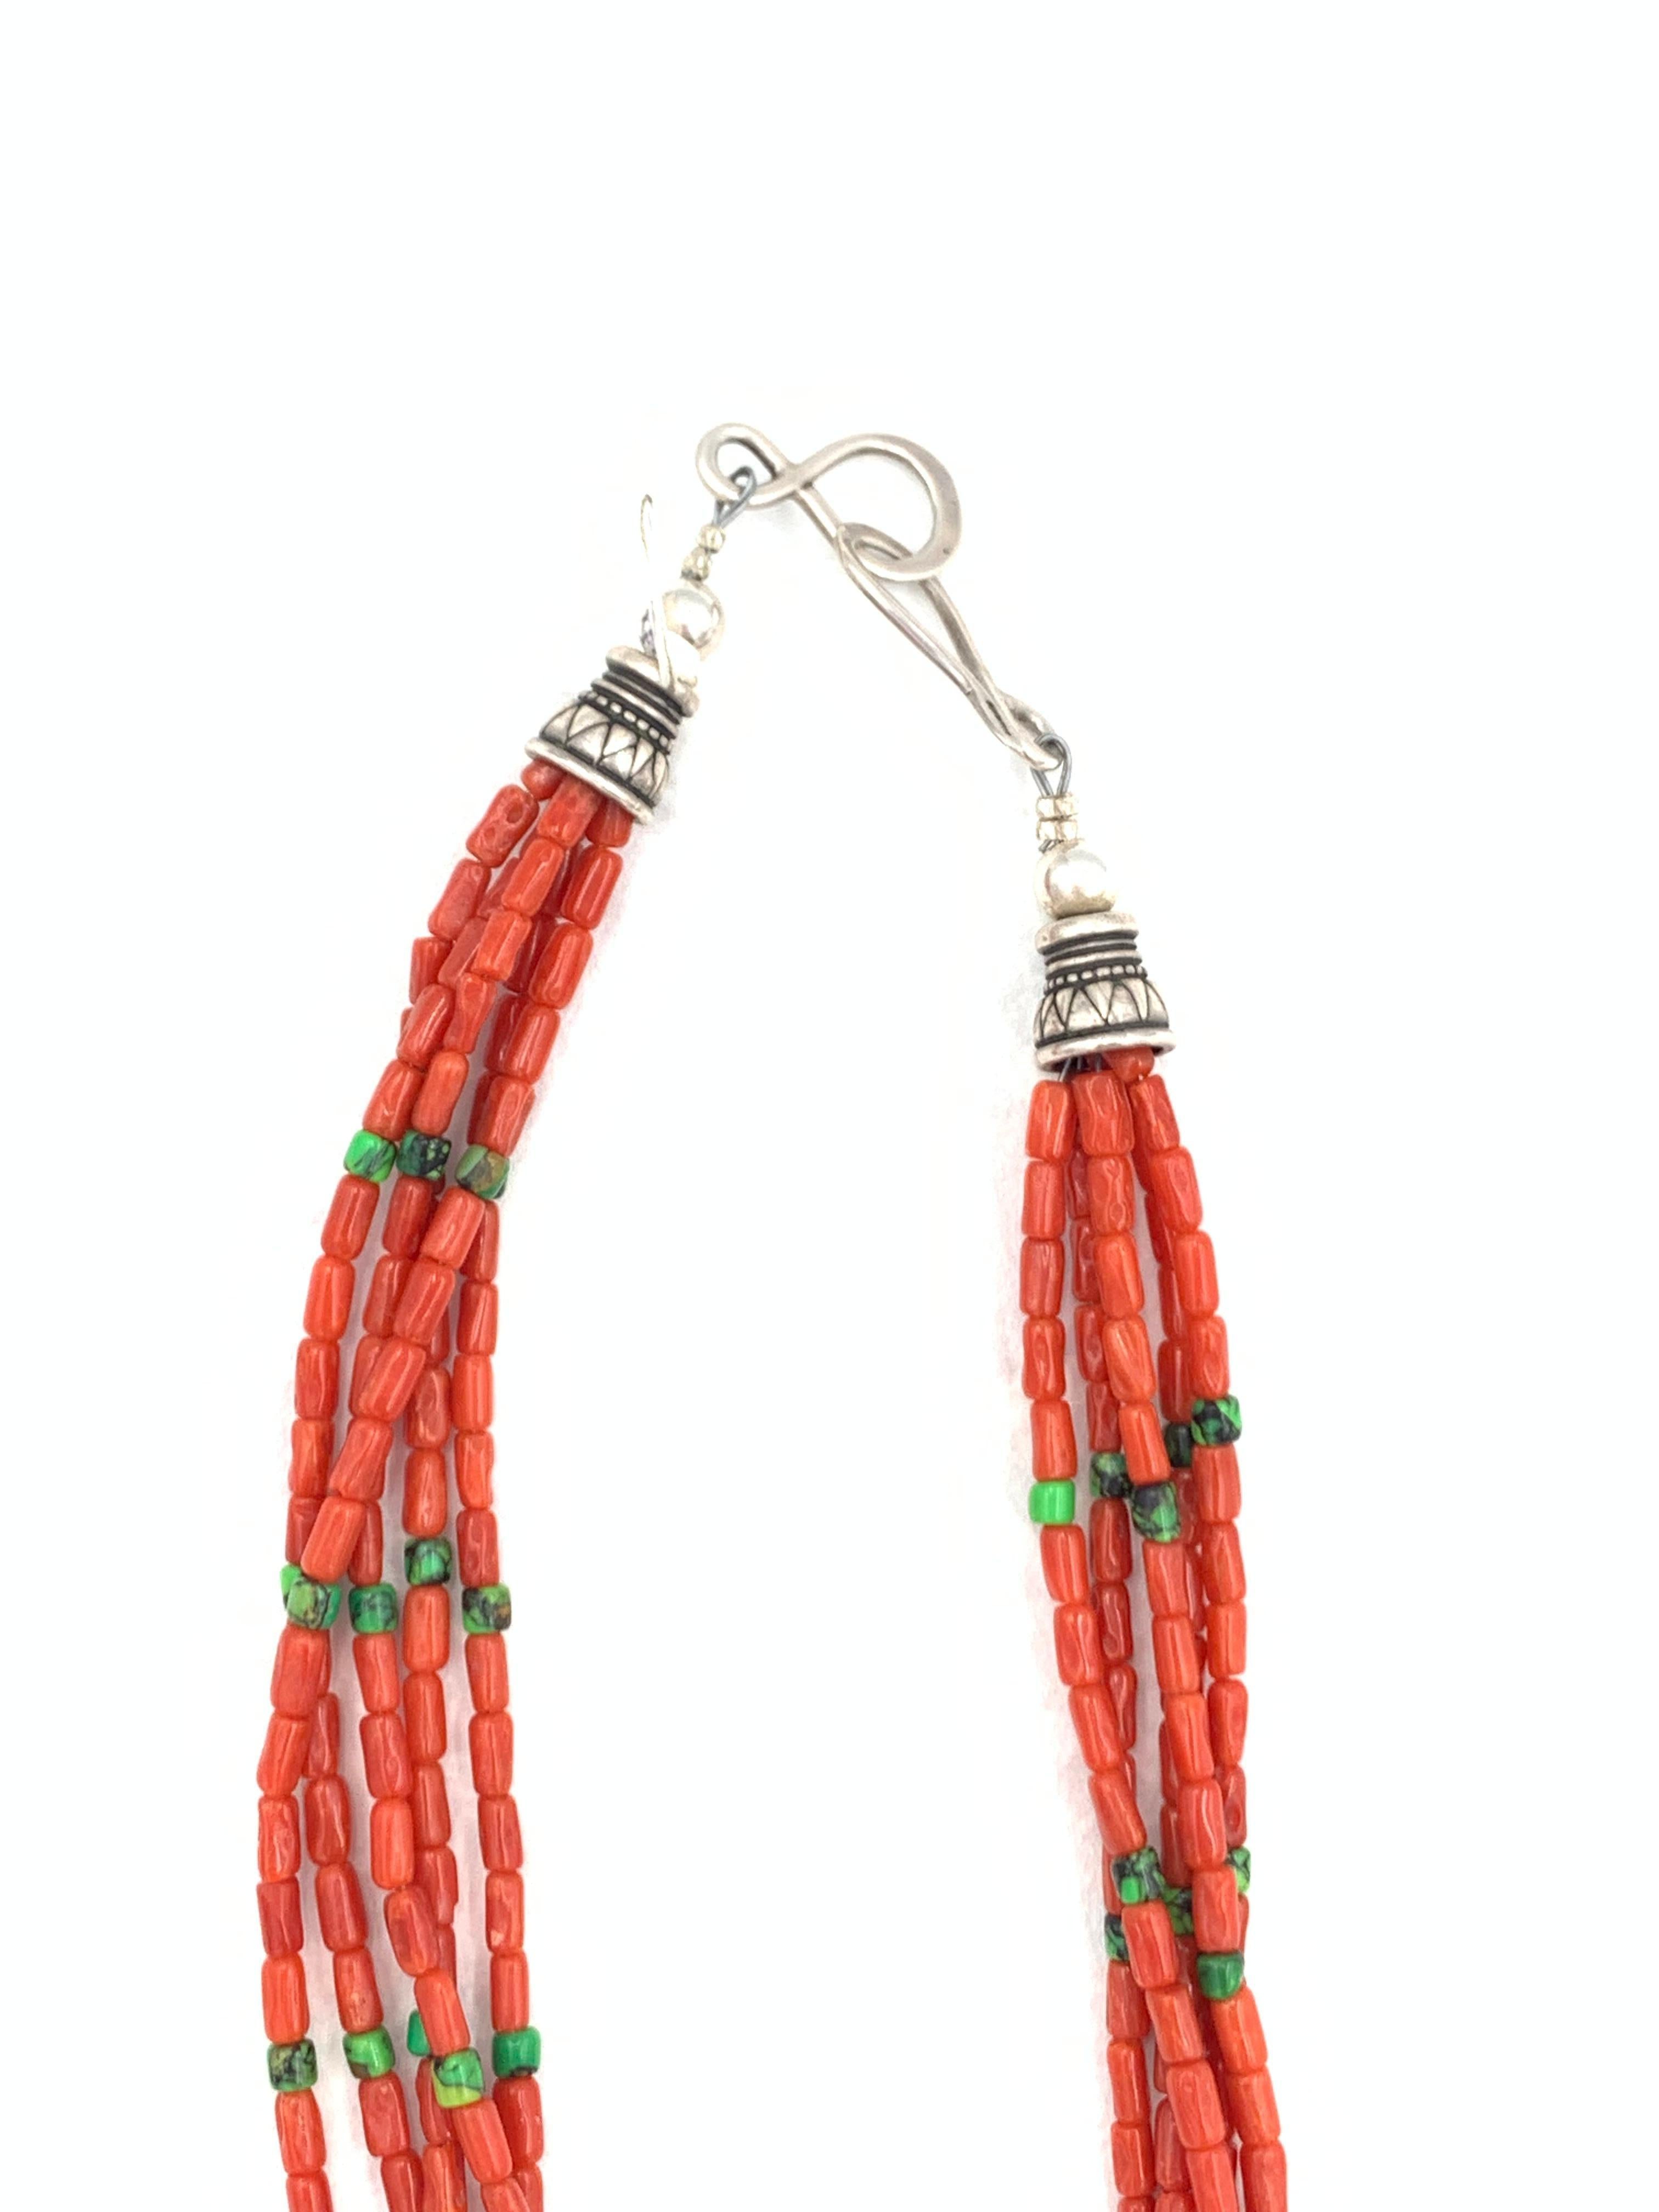 Contemporary Heishi Style Coral Beaded Necklace with Five Strands. For Sale 4